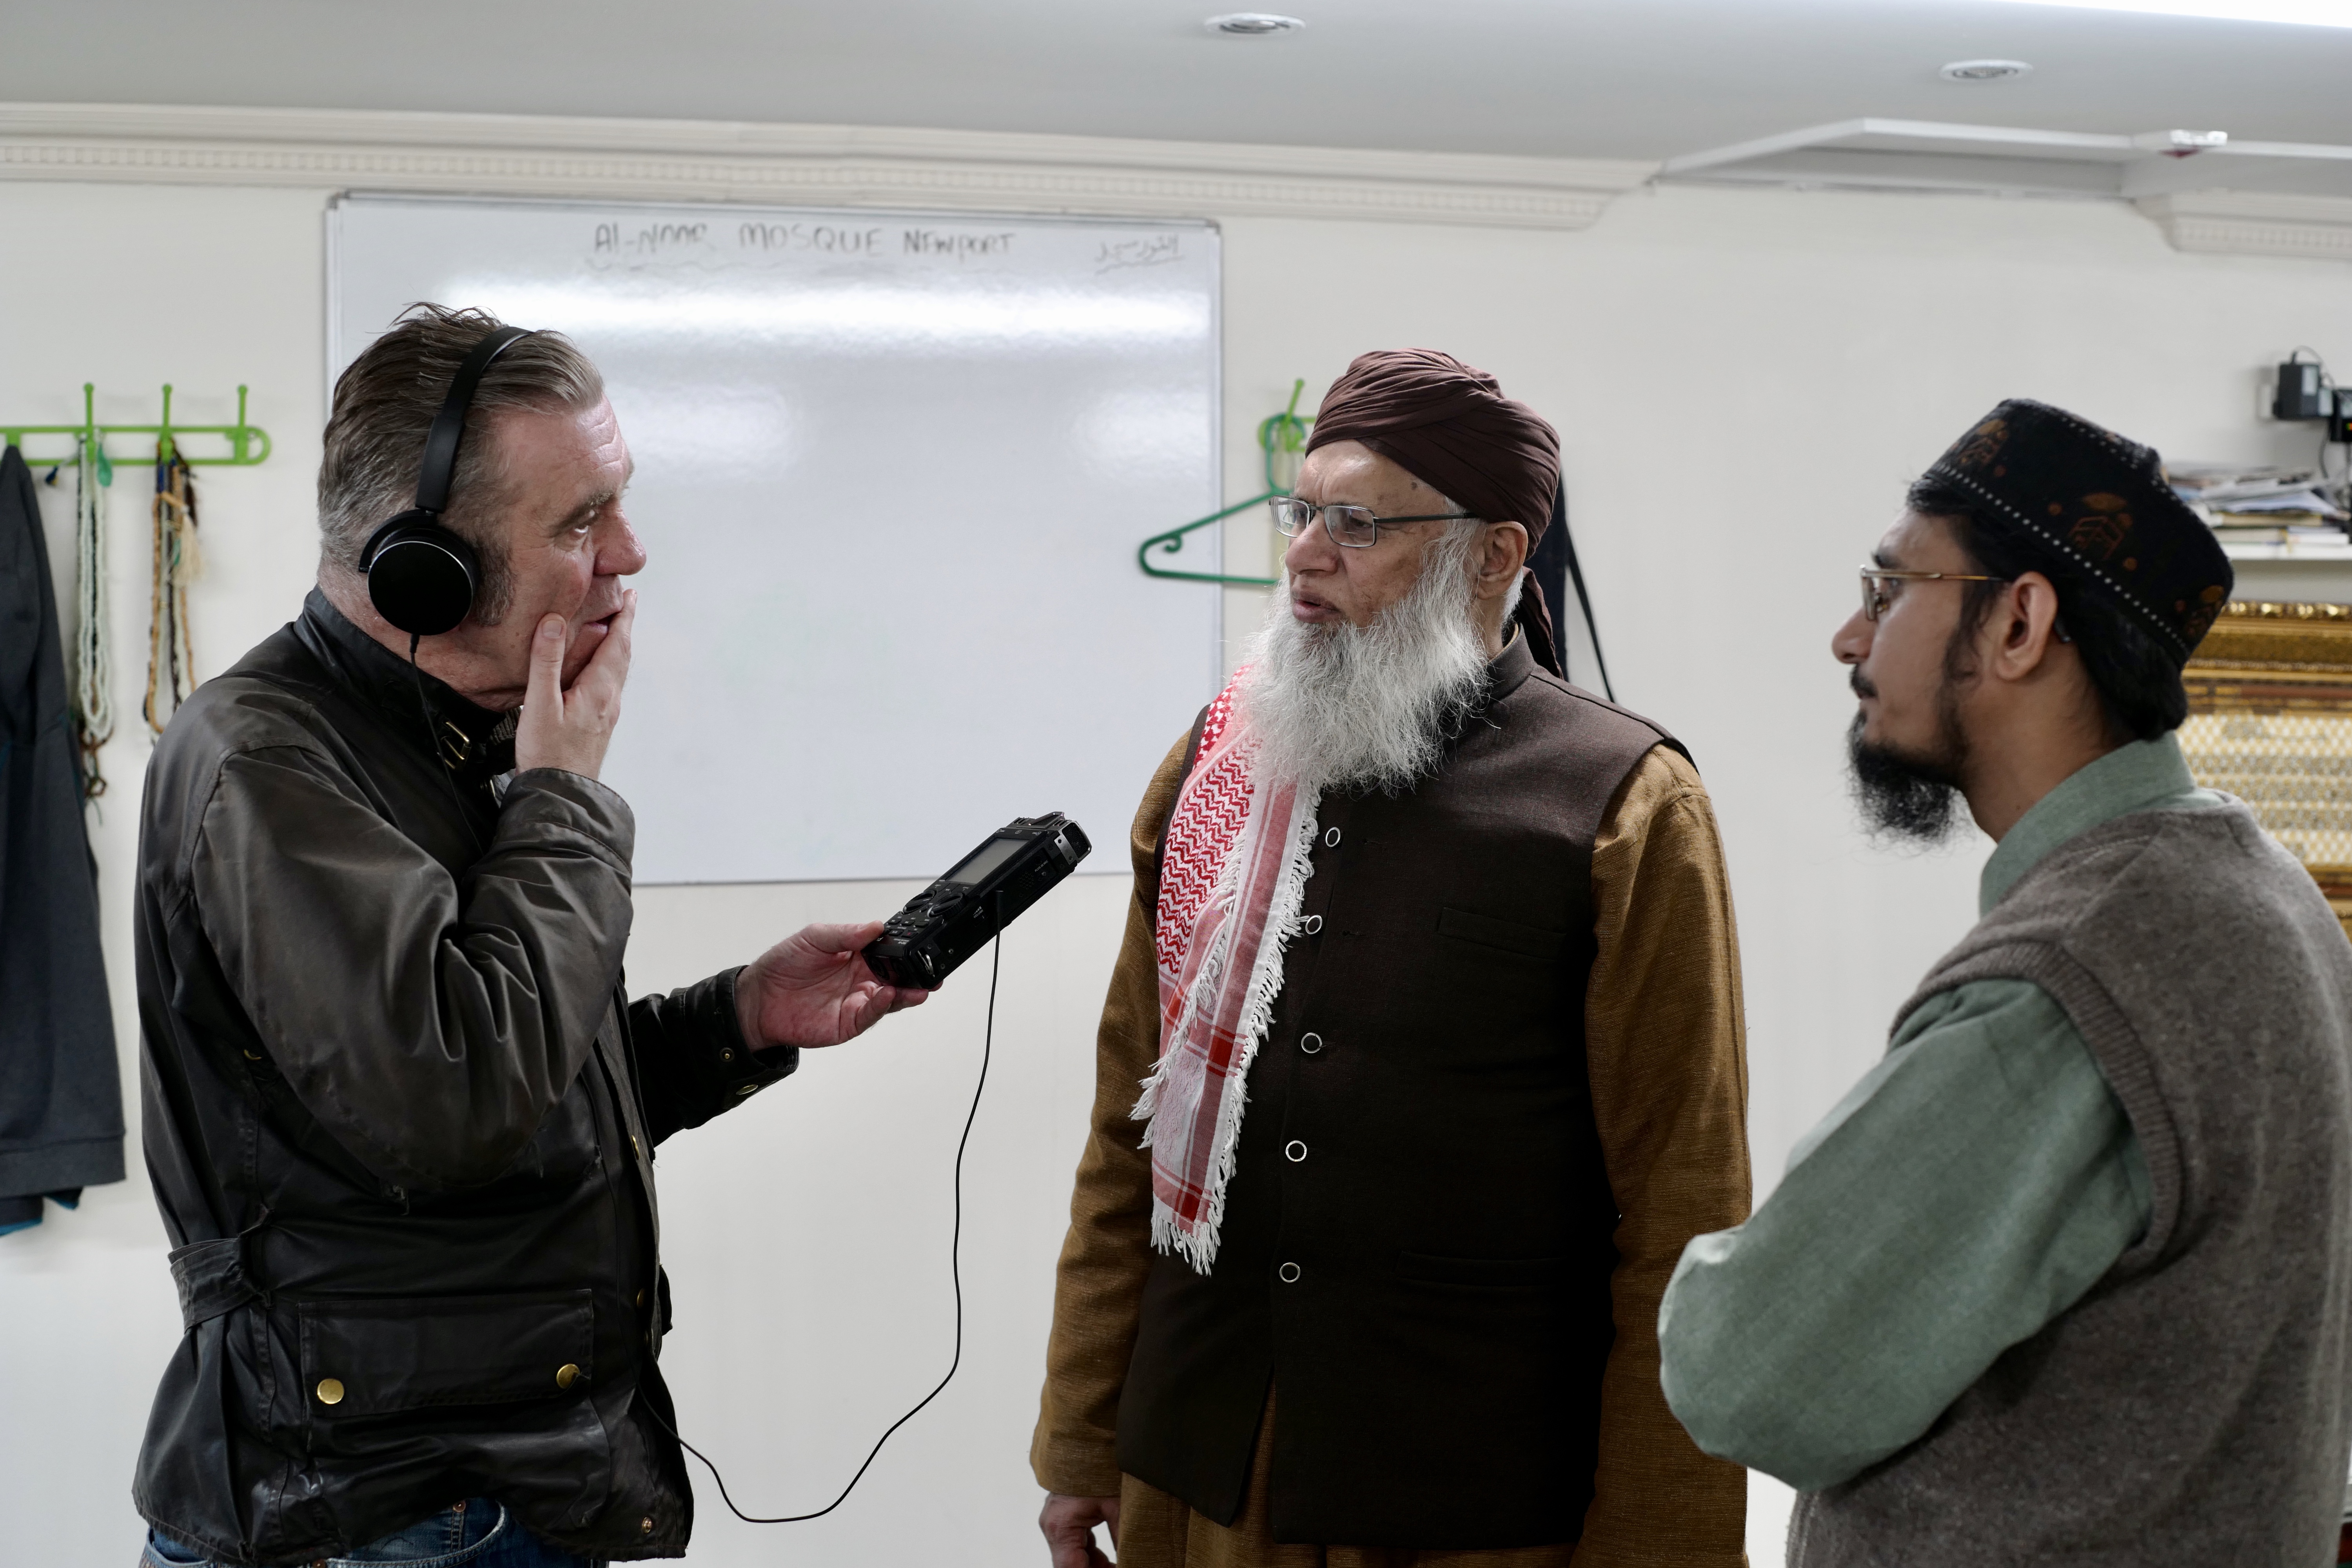 'PARADE': A site-specific installation project based in Maindee, Newport. John interviewing Imams Muhammad Abid Chishti and Hafiz Mushtaq Ahmad in the Al-Noor Mosque.